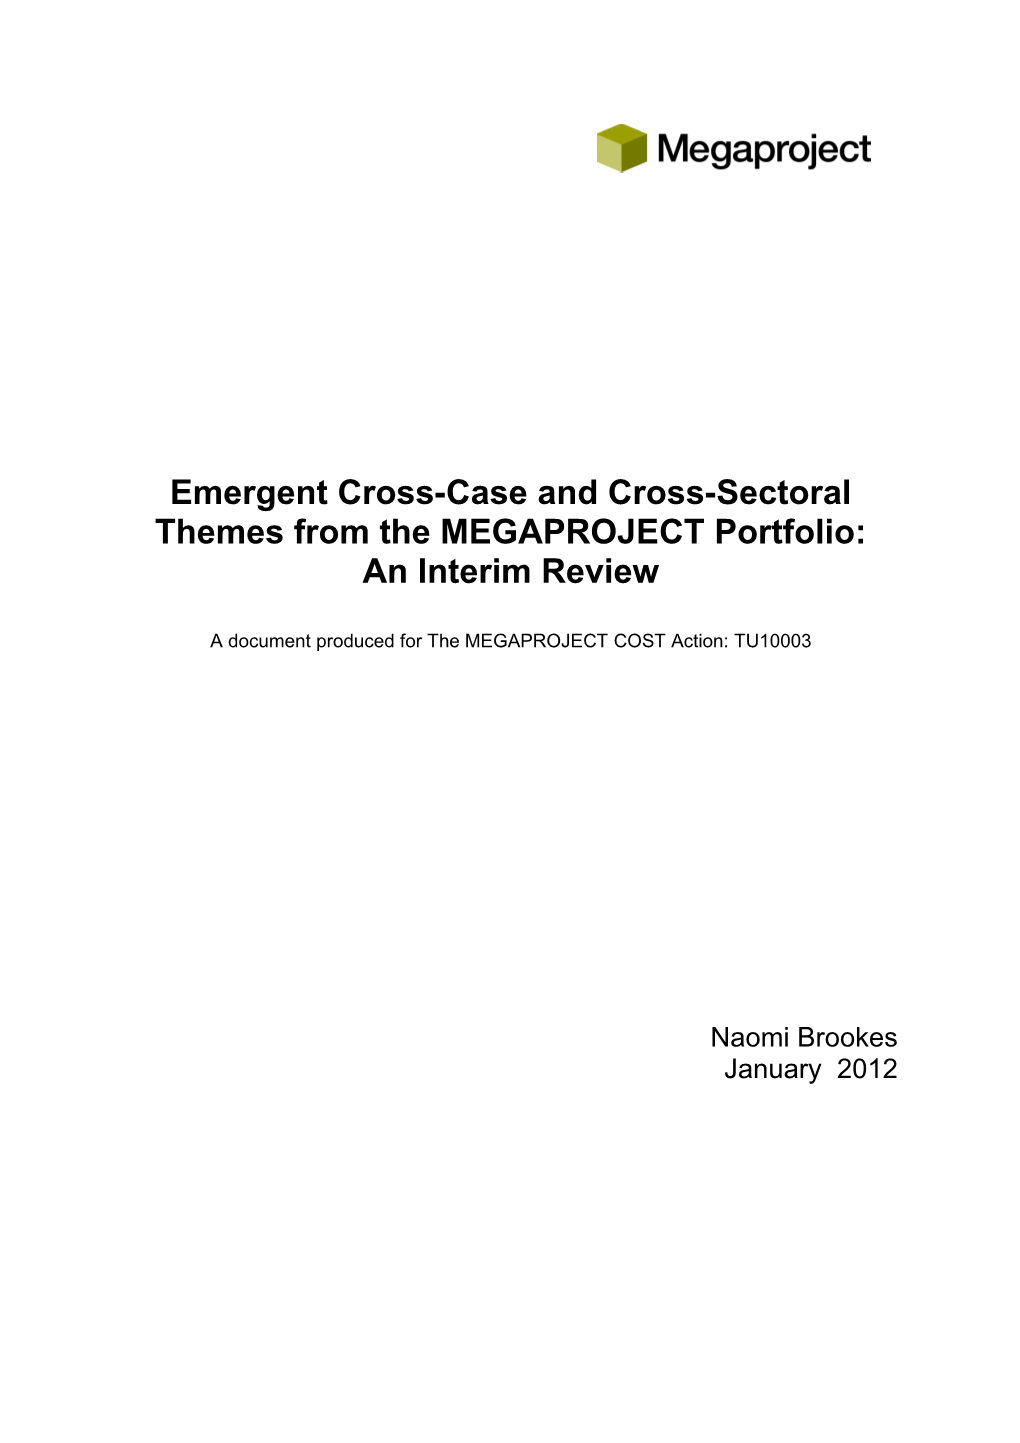 Emergent Cross-Case and Cross-Sectoral Themes from the MEGAPROJECT Portfolio